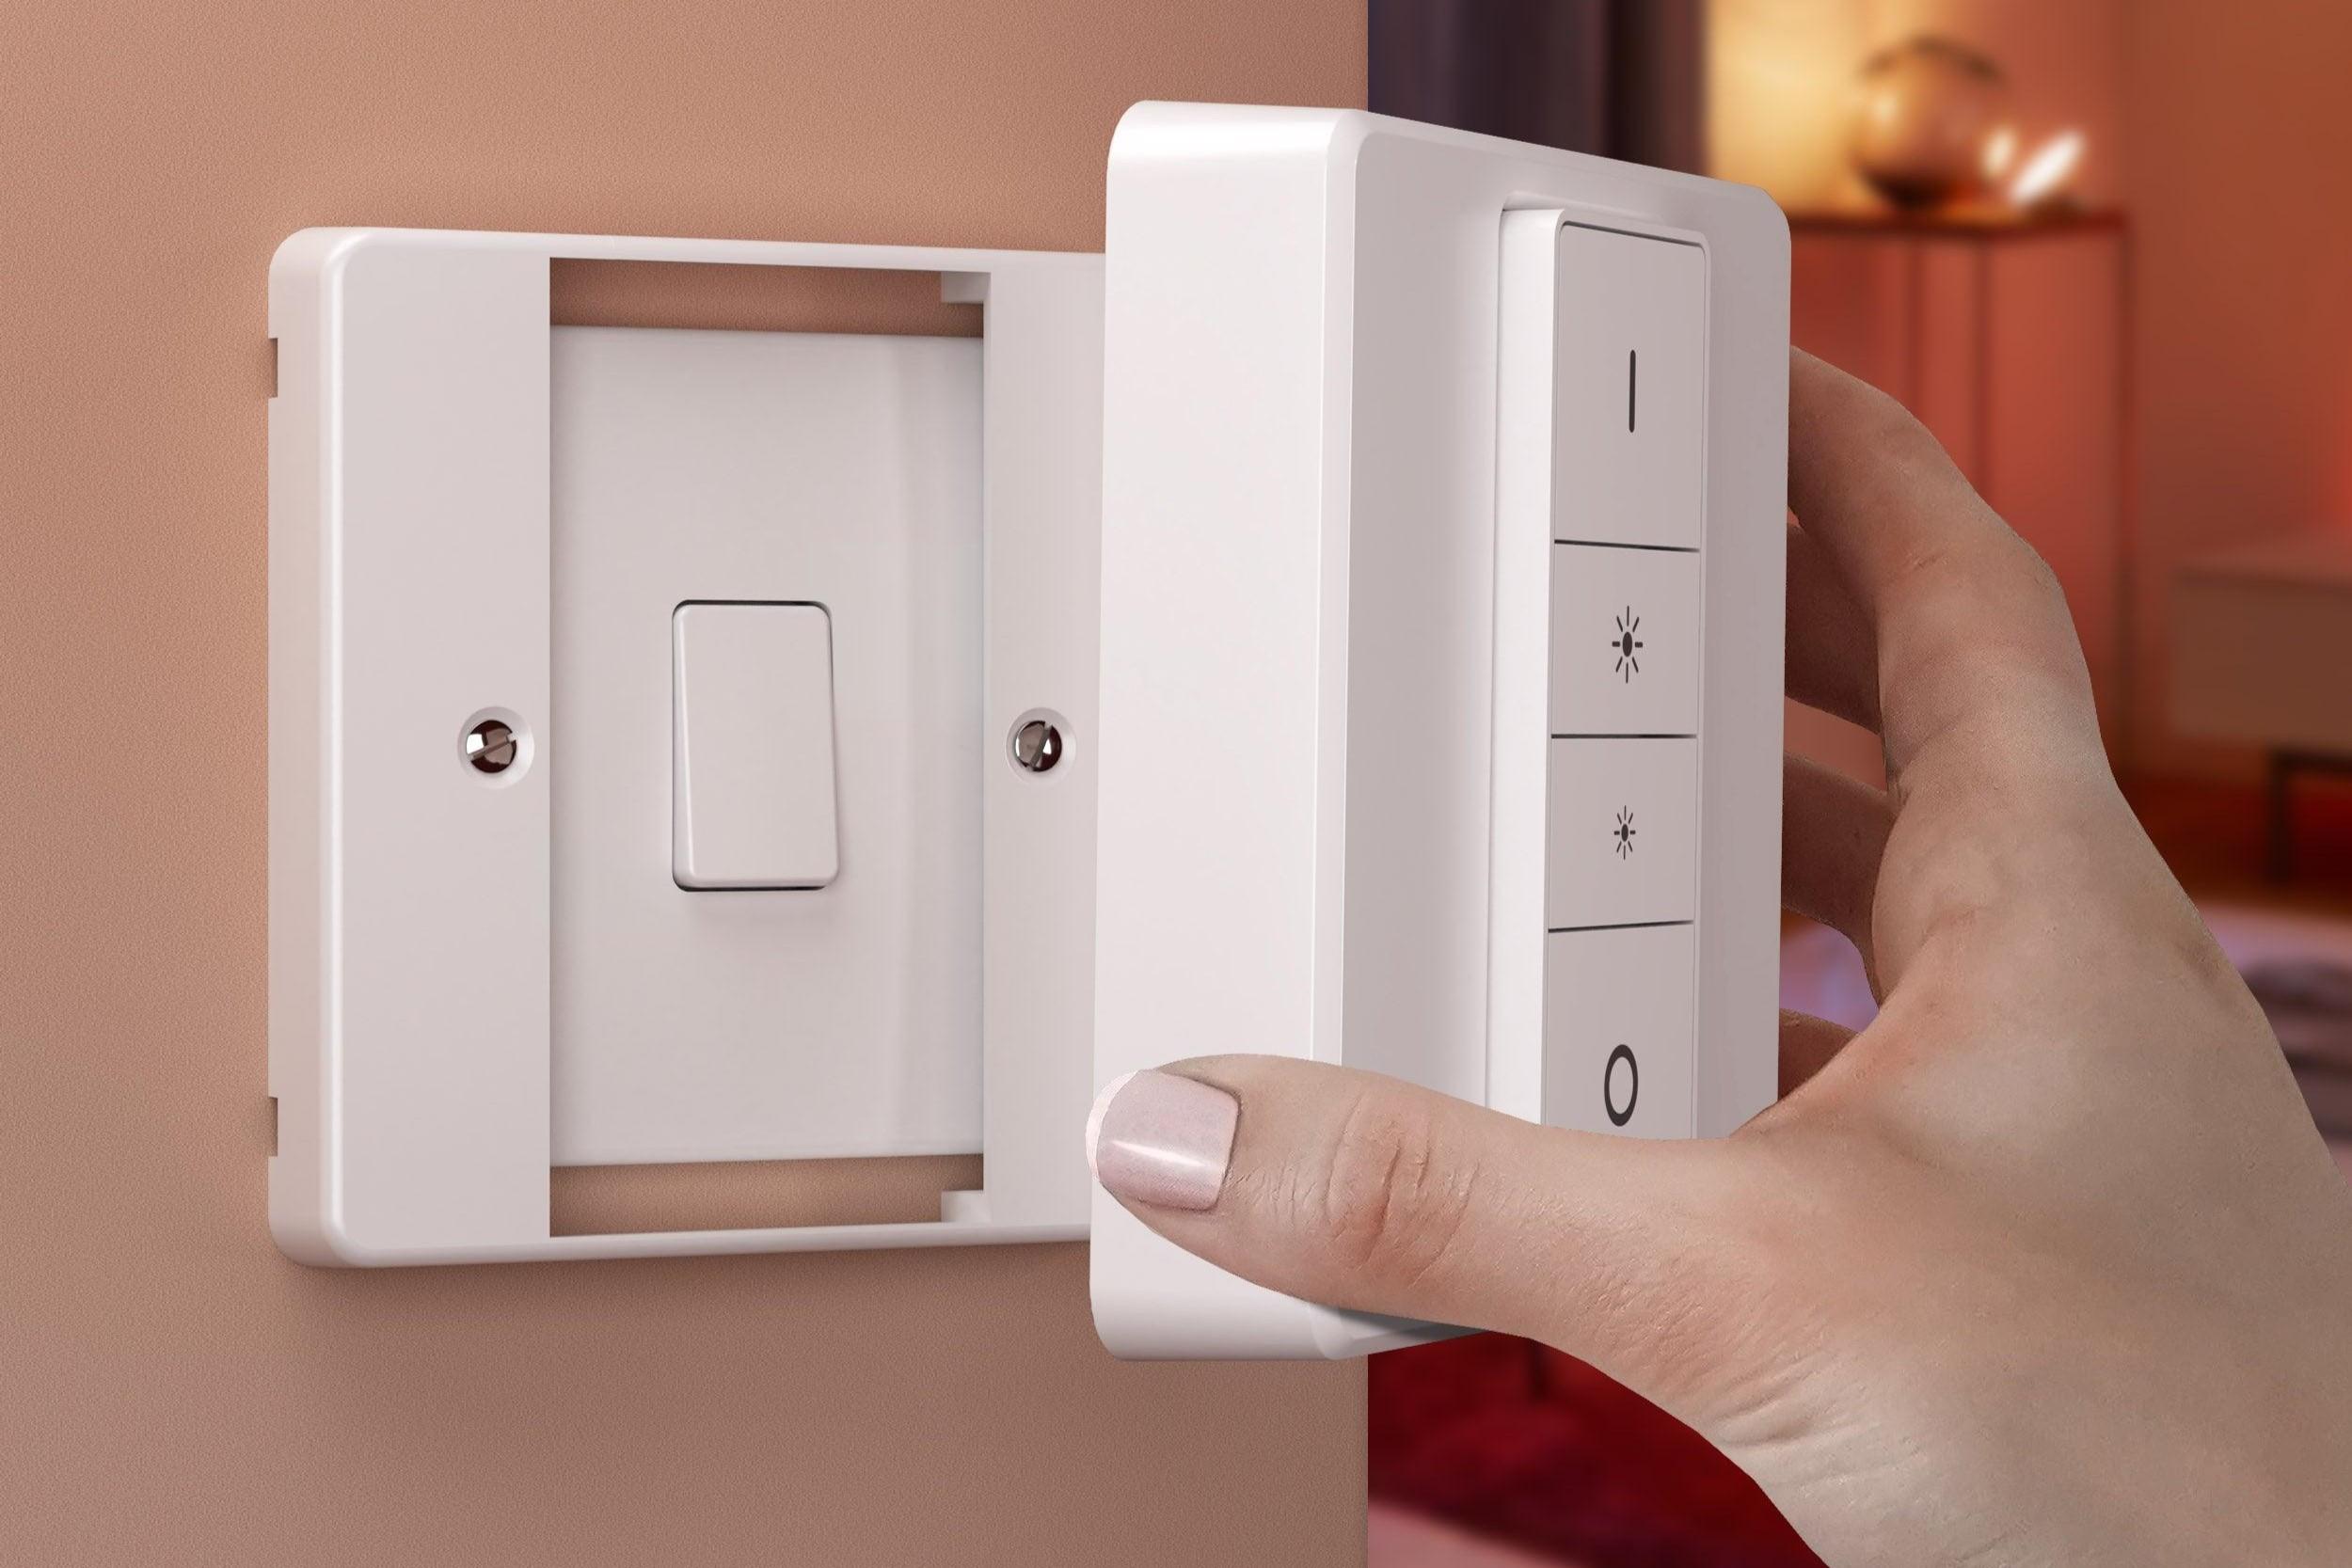 How To Connect Philips Hue Switch To Existing Lights